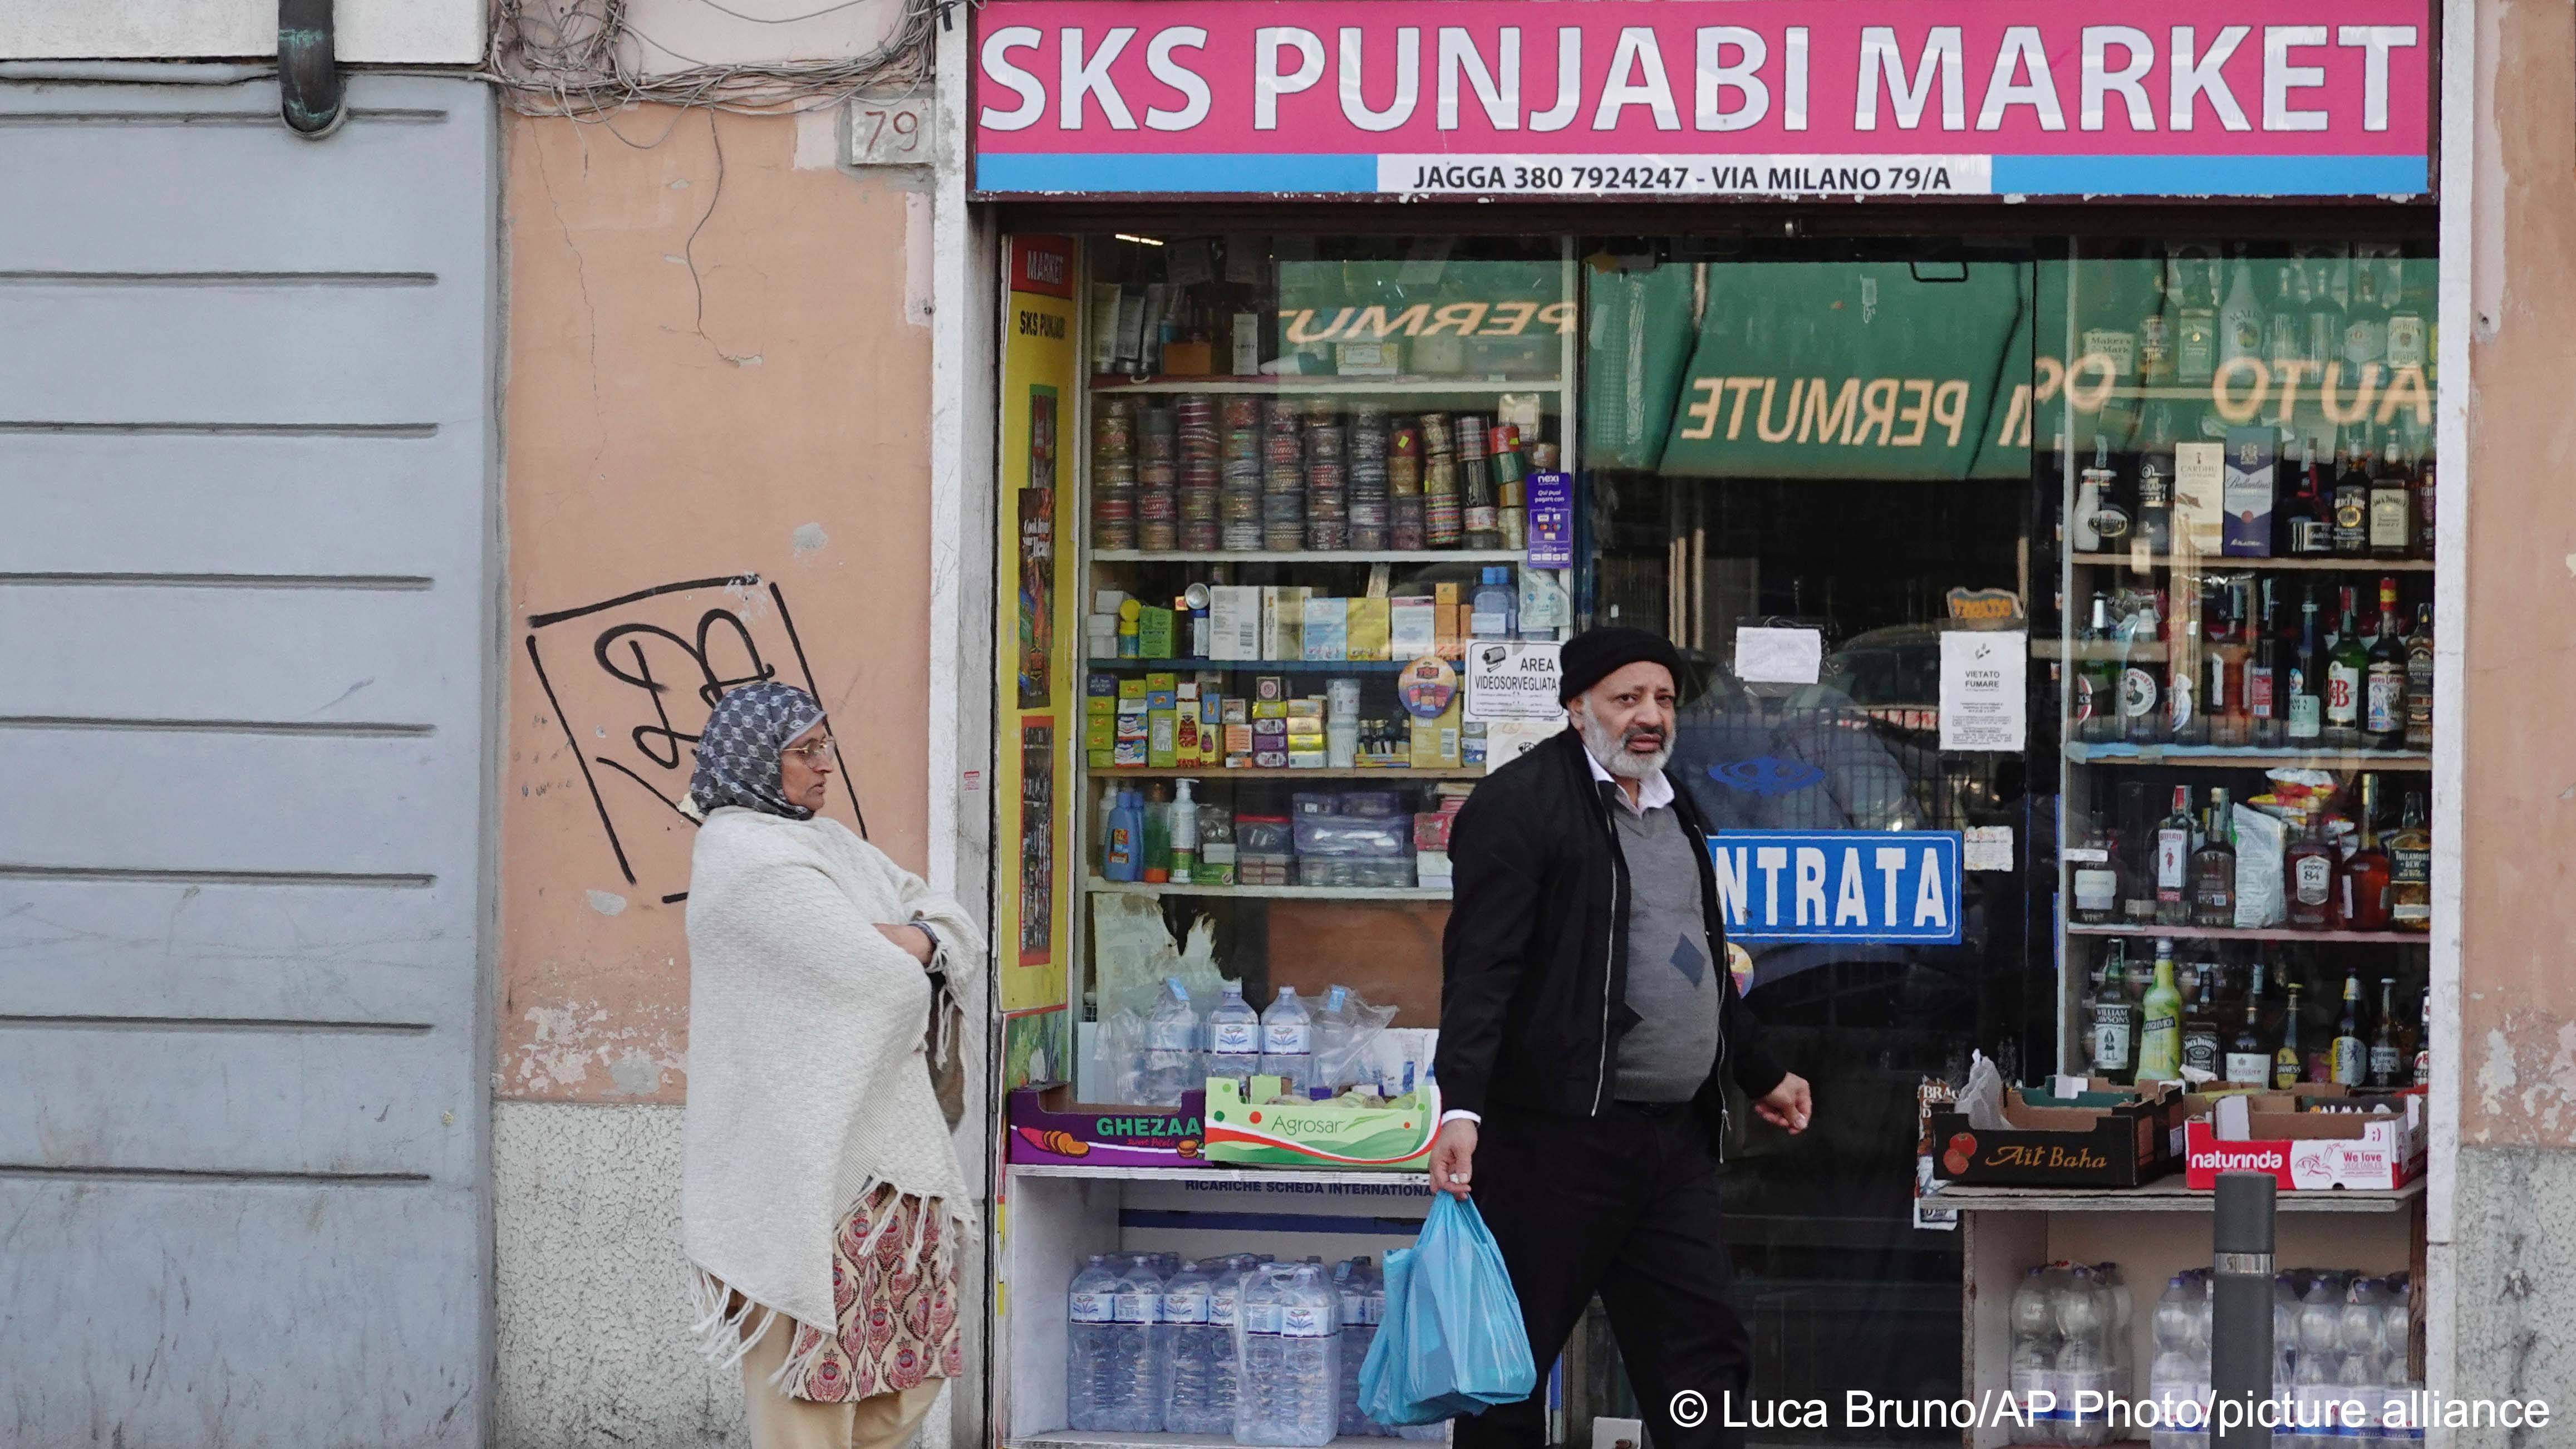 A Punjabi food store is open in the Fiumicello district of Brescia, northern Italy, 8 February 2023 (image: Luca Bruno/AP Photo/picture alliance)